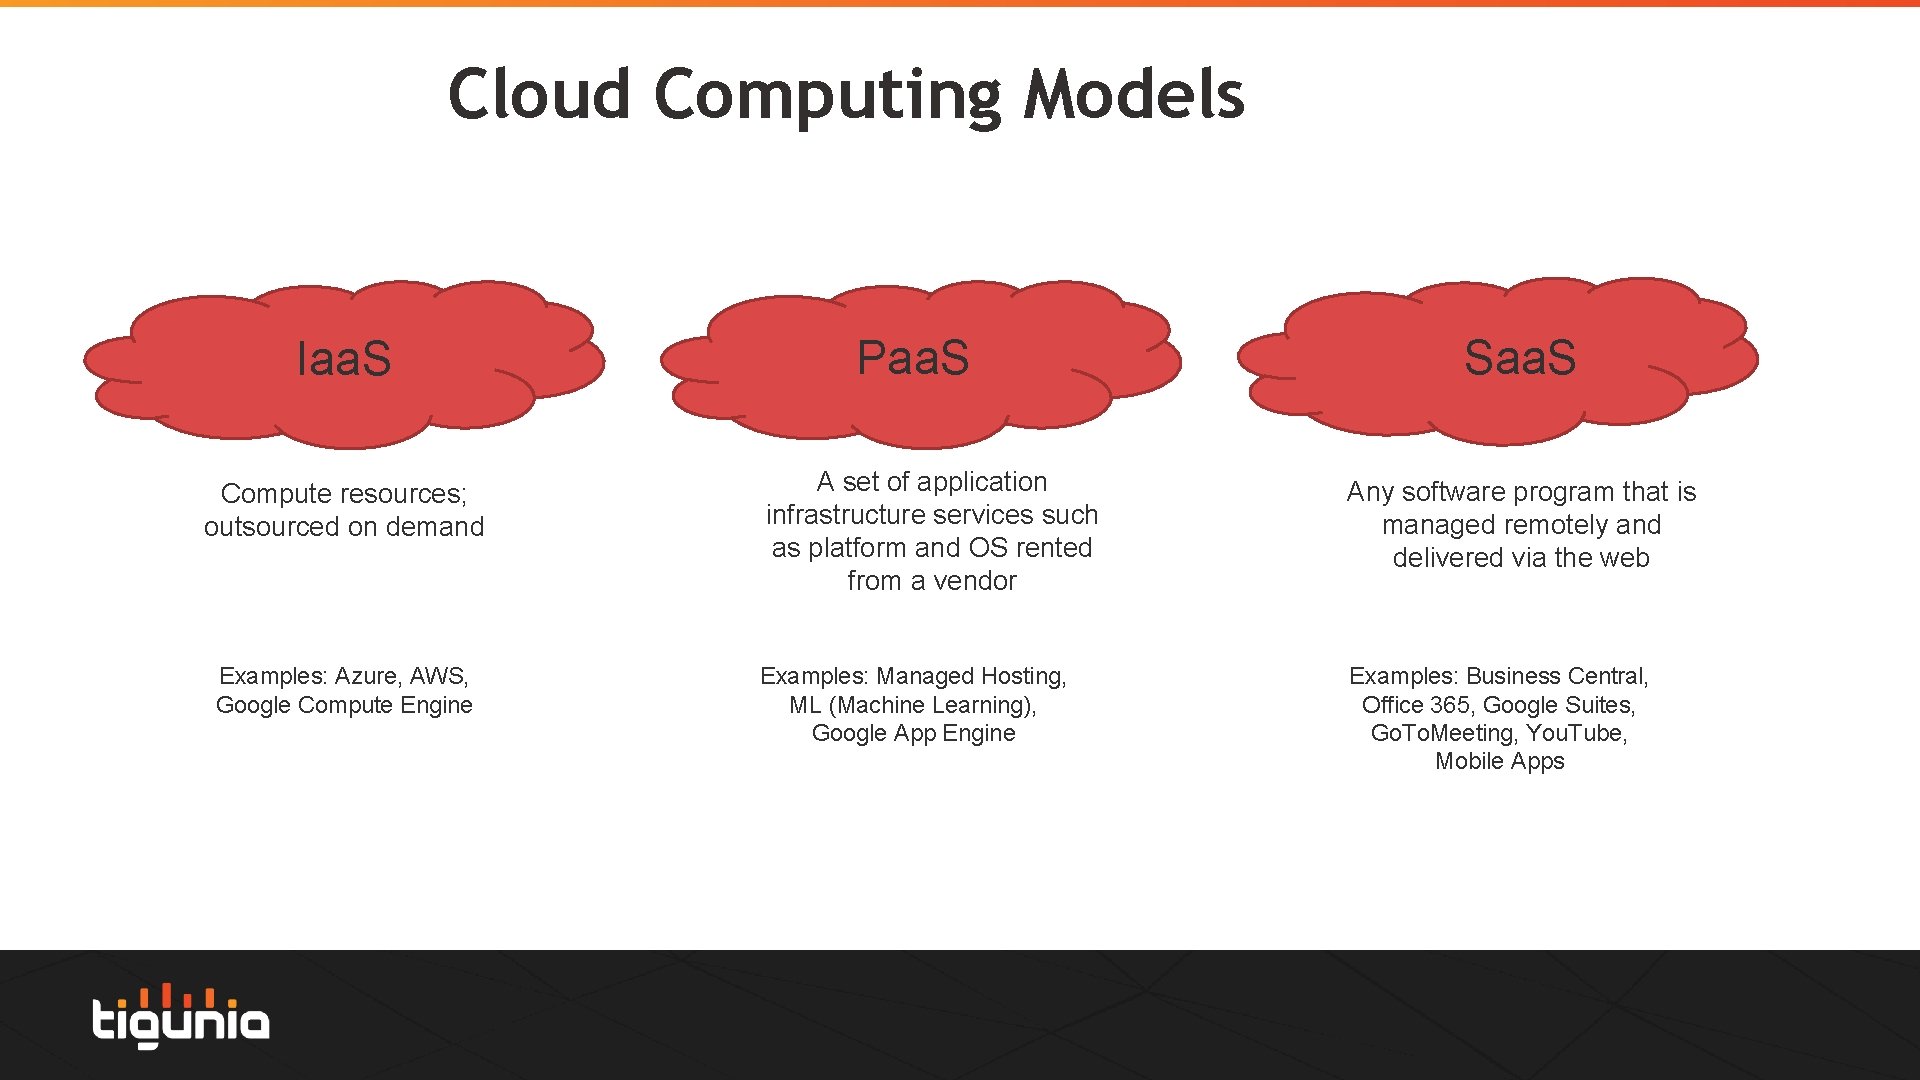 Cloud Computing Models Iaa. S Compute resources; outsourced on demand Examples: Azure, AWS, Google